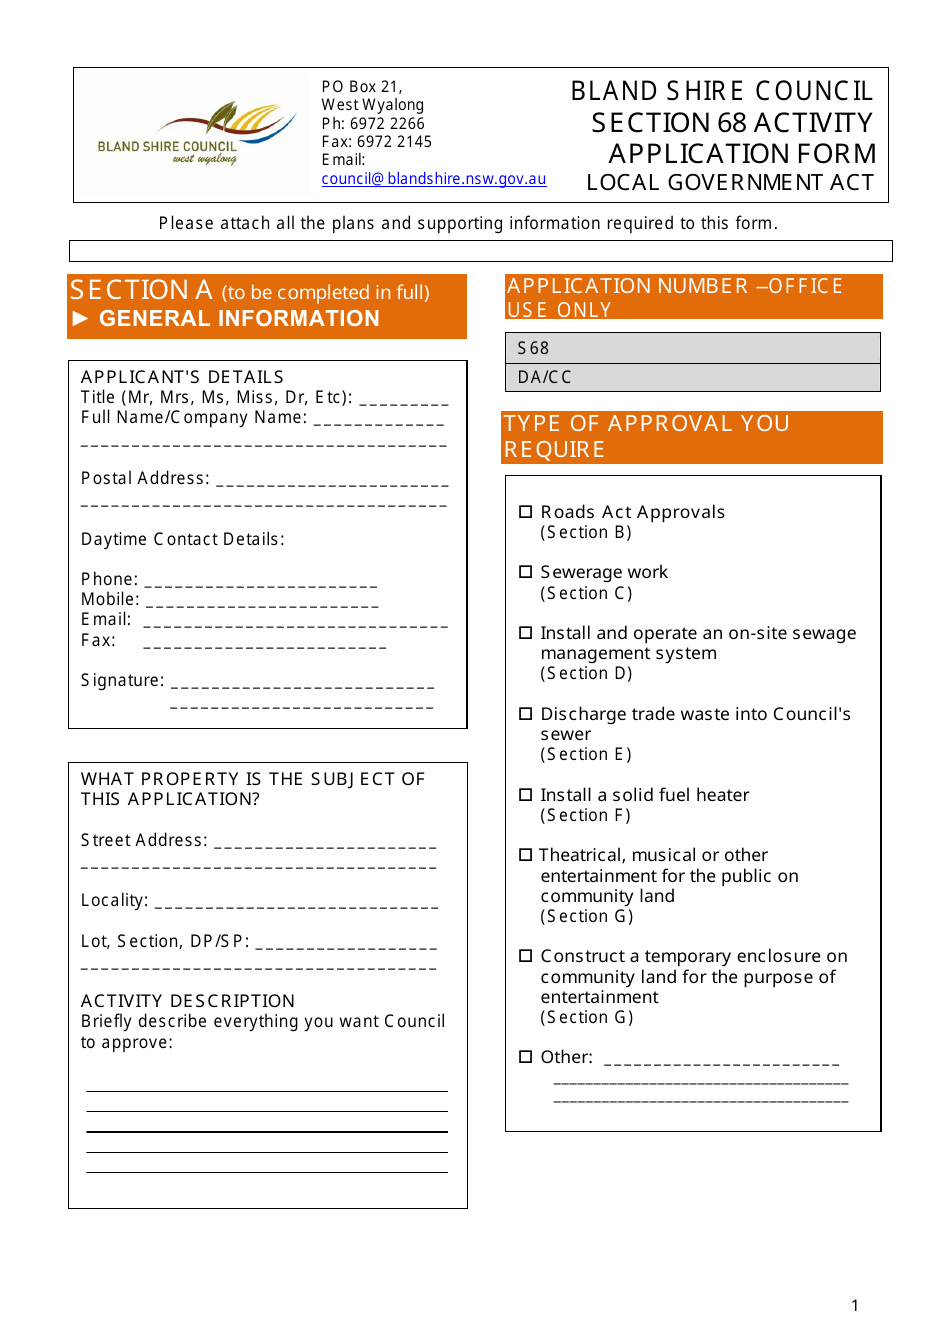 Section 68 Activity Application Form - Town of West Wyalong, New South Wales, Australia, Page 1